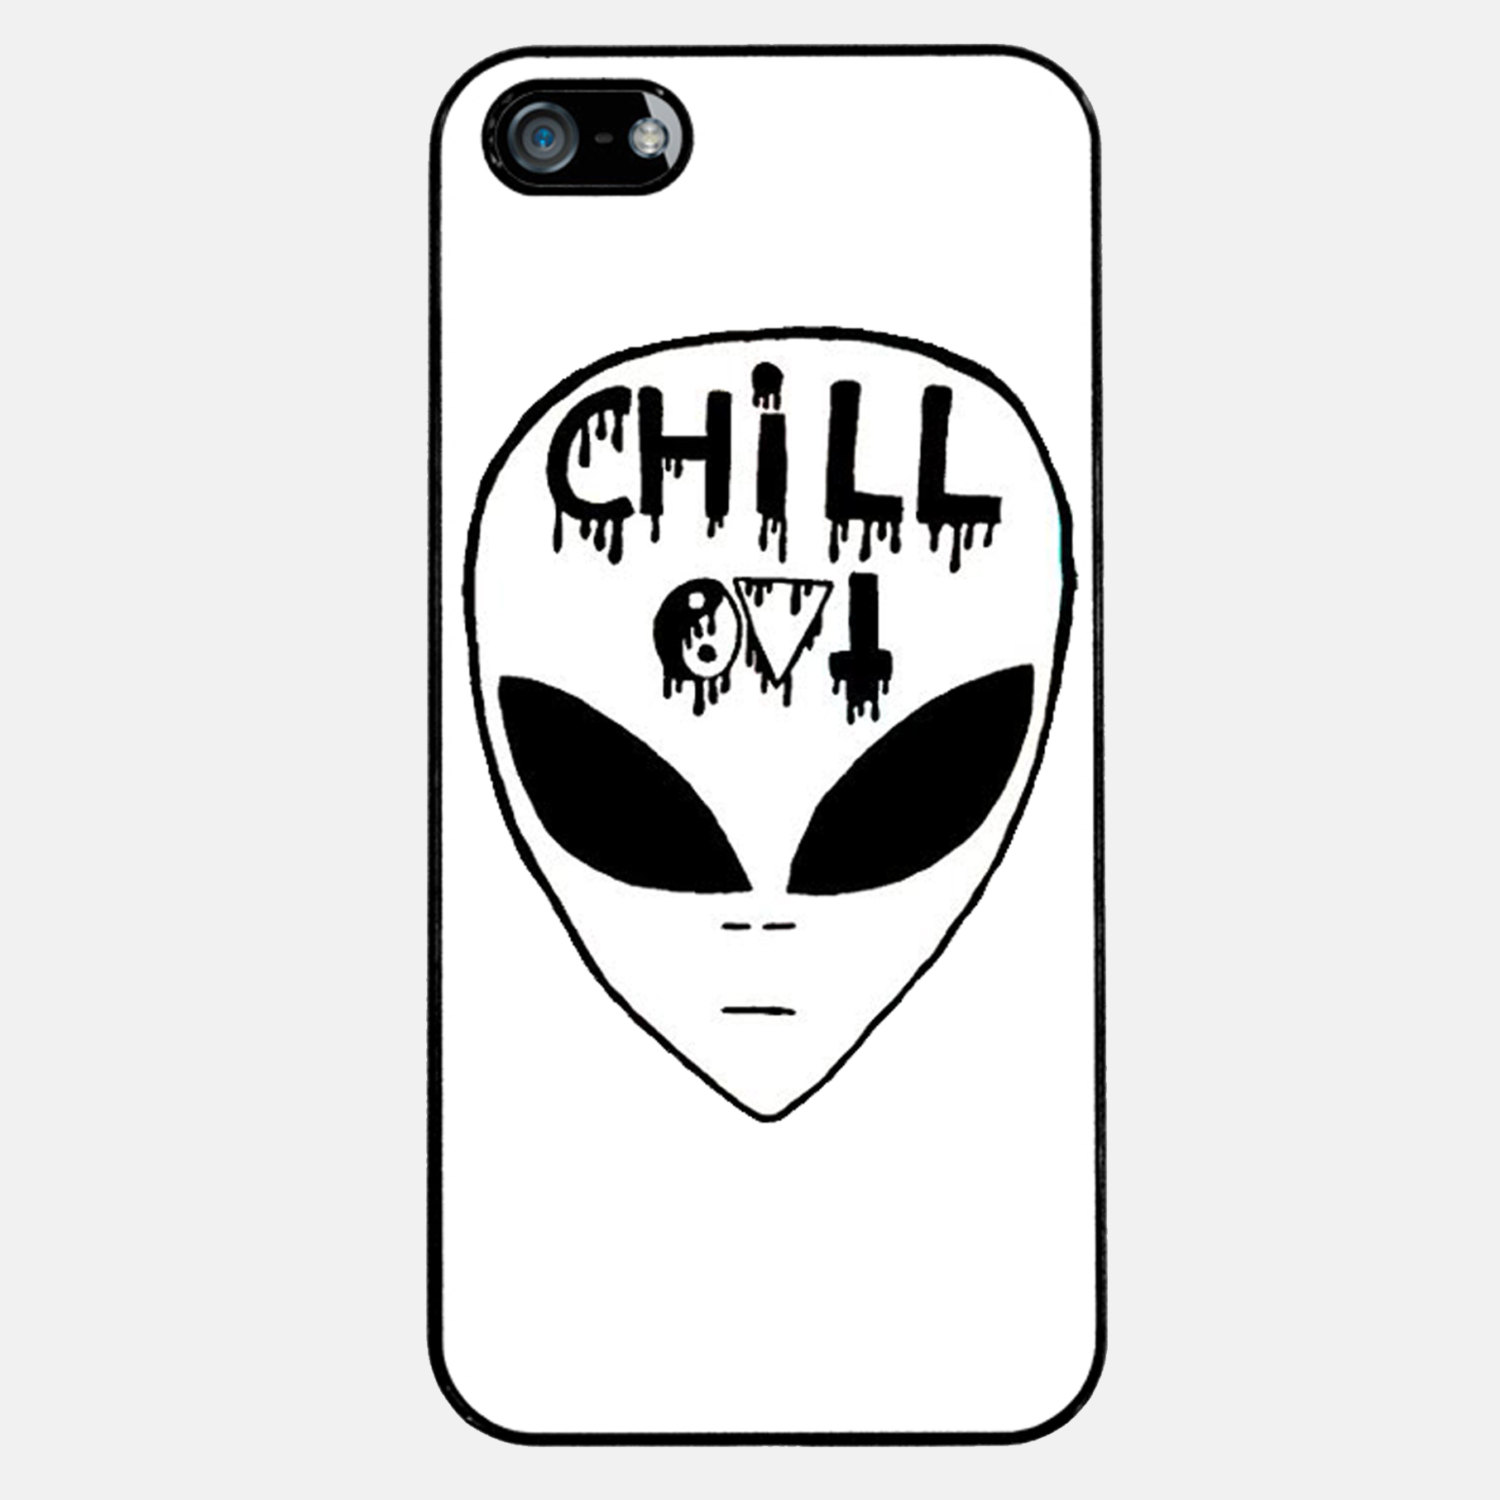 Chill Out Alien Iphone 5 Case - Mobile Phone - HD Wallpaper 